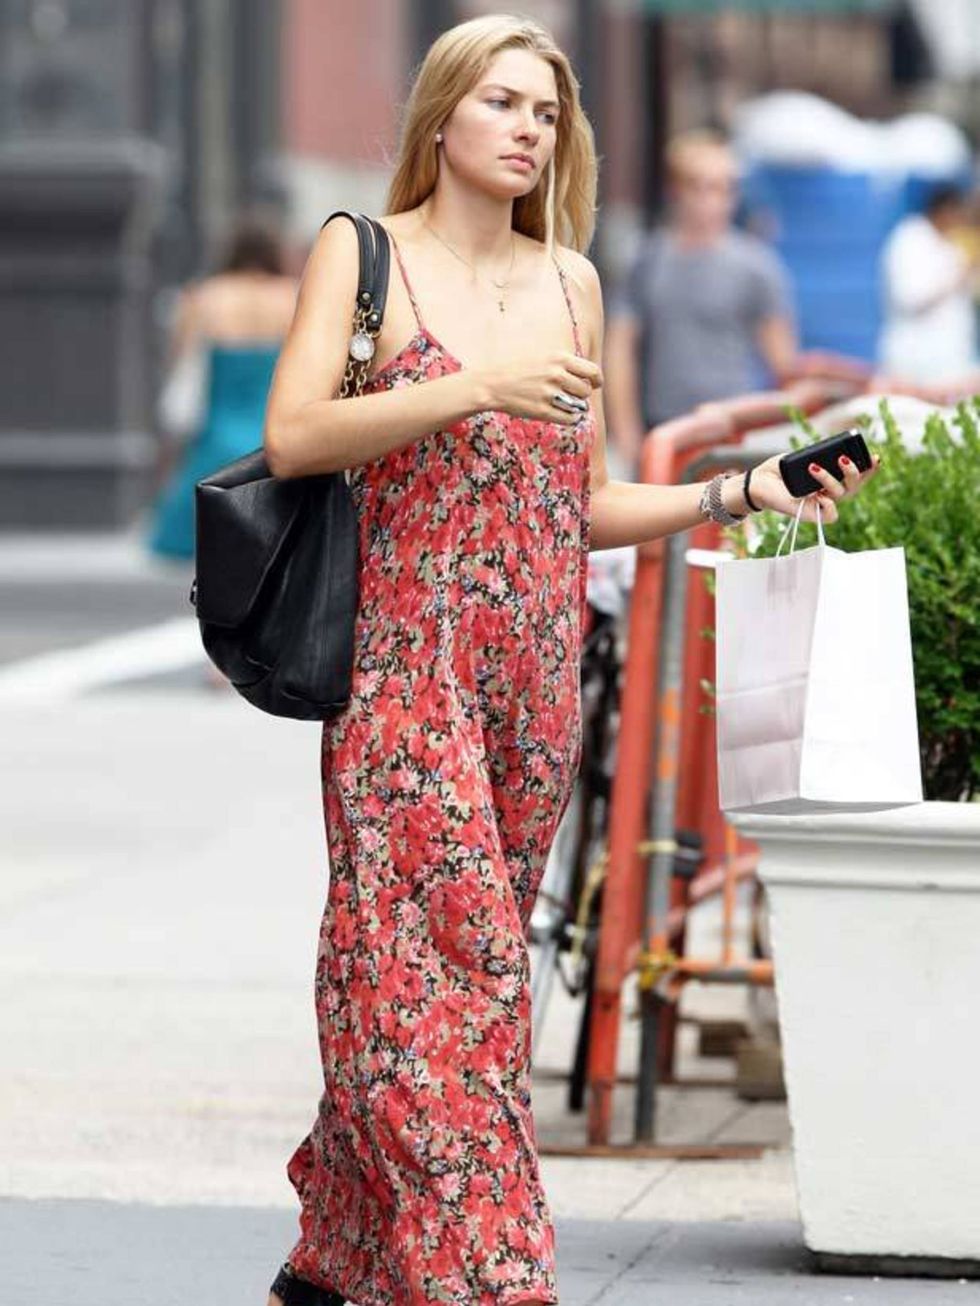 <p><a href="http://www.elleuk.com/starstyle/style-files/(section)/jessica-hart">Jessica Hart</a> adds a New York vibe to her floral maxi with black leather accessories</p>